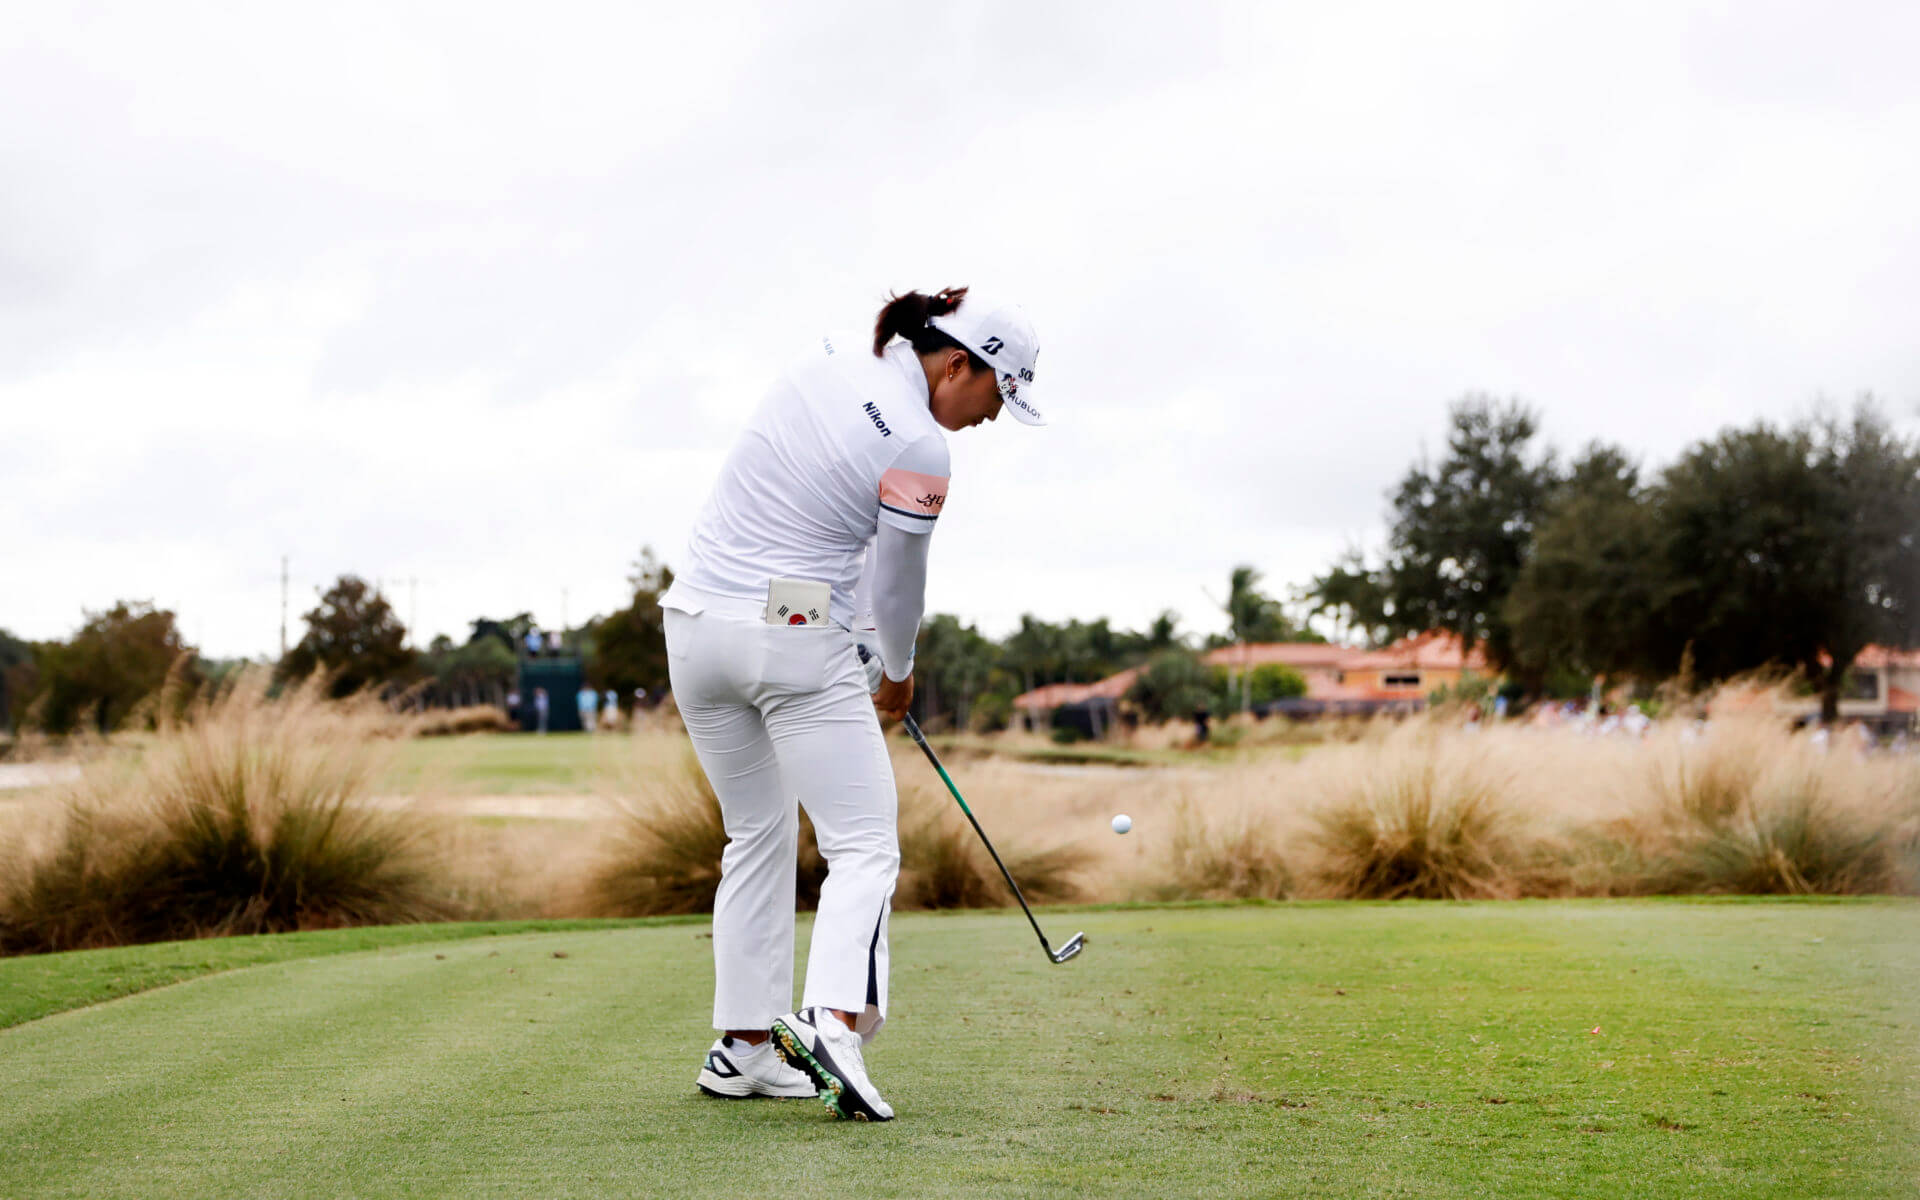 ‘It Felt like the Right Time’: Why the LPGA Self-funded a Docu-series